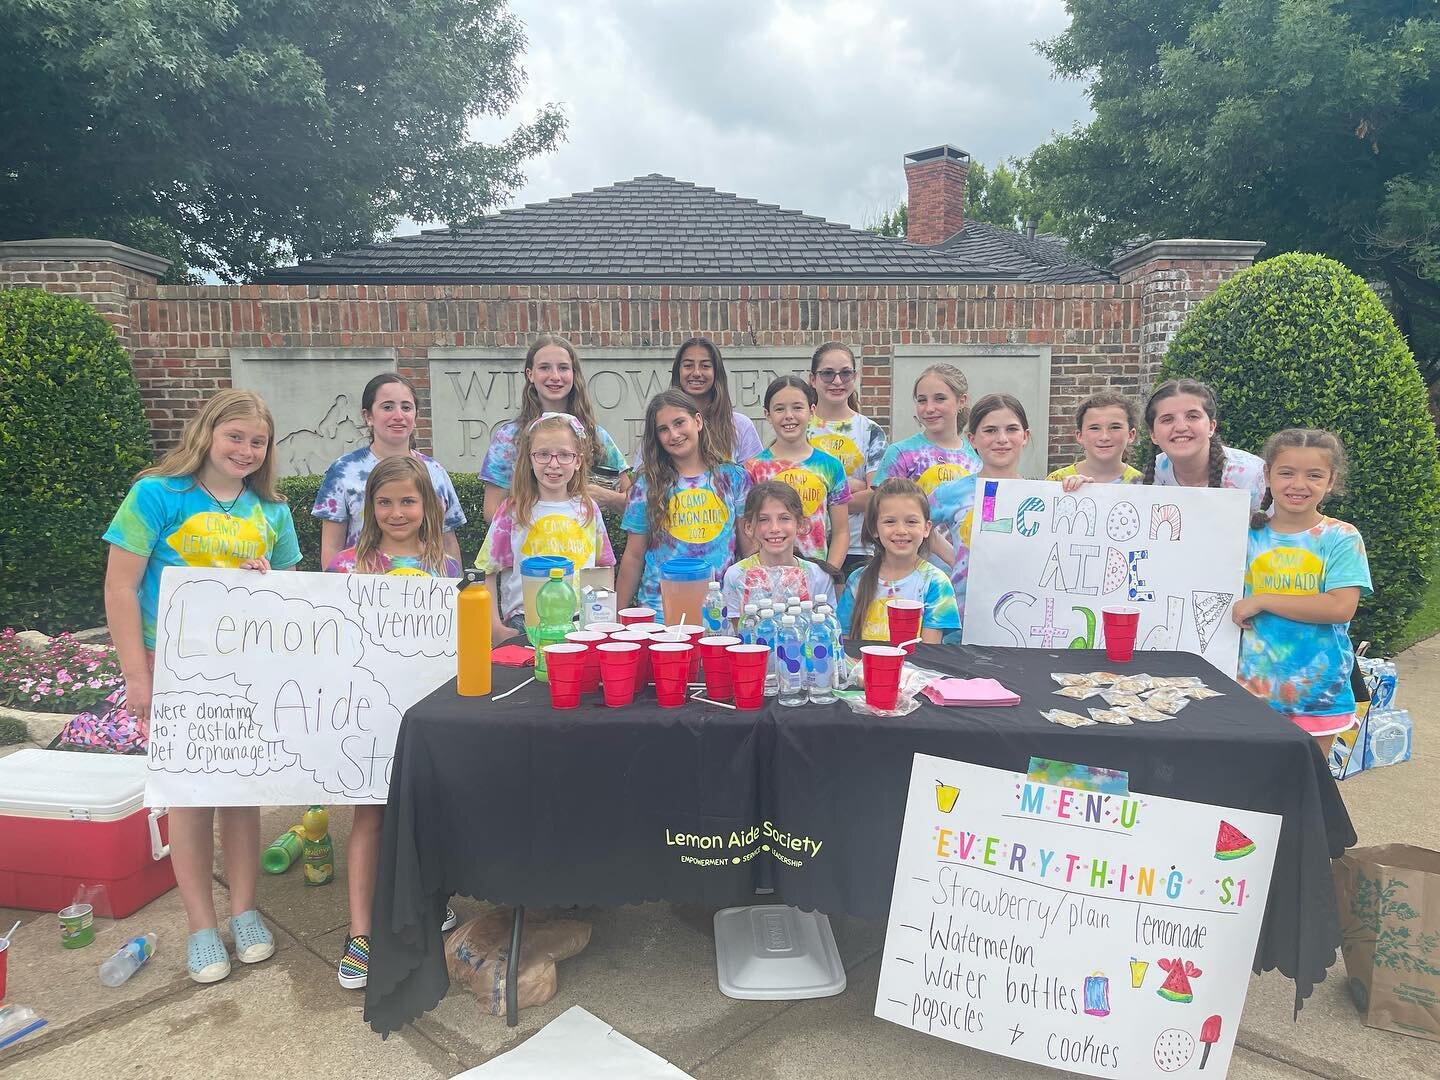 🍋❤️Selling lemonade and cookies for @el_petorphanage!!❤️🍋

We made $507!!! Thank you everyone for coming! We had so much fun!